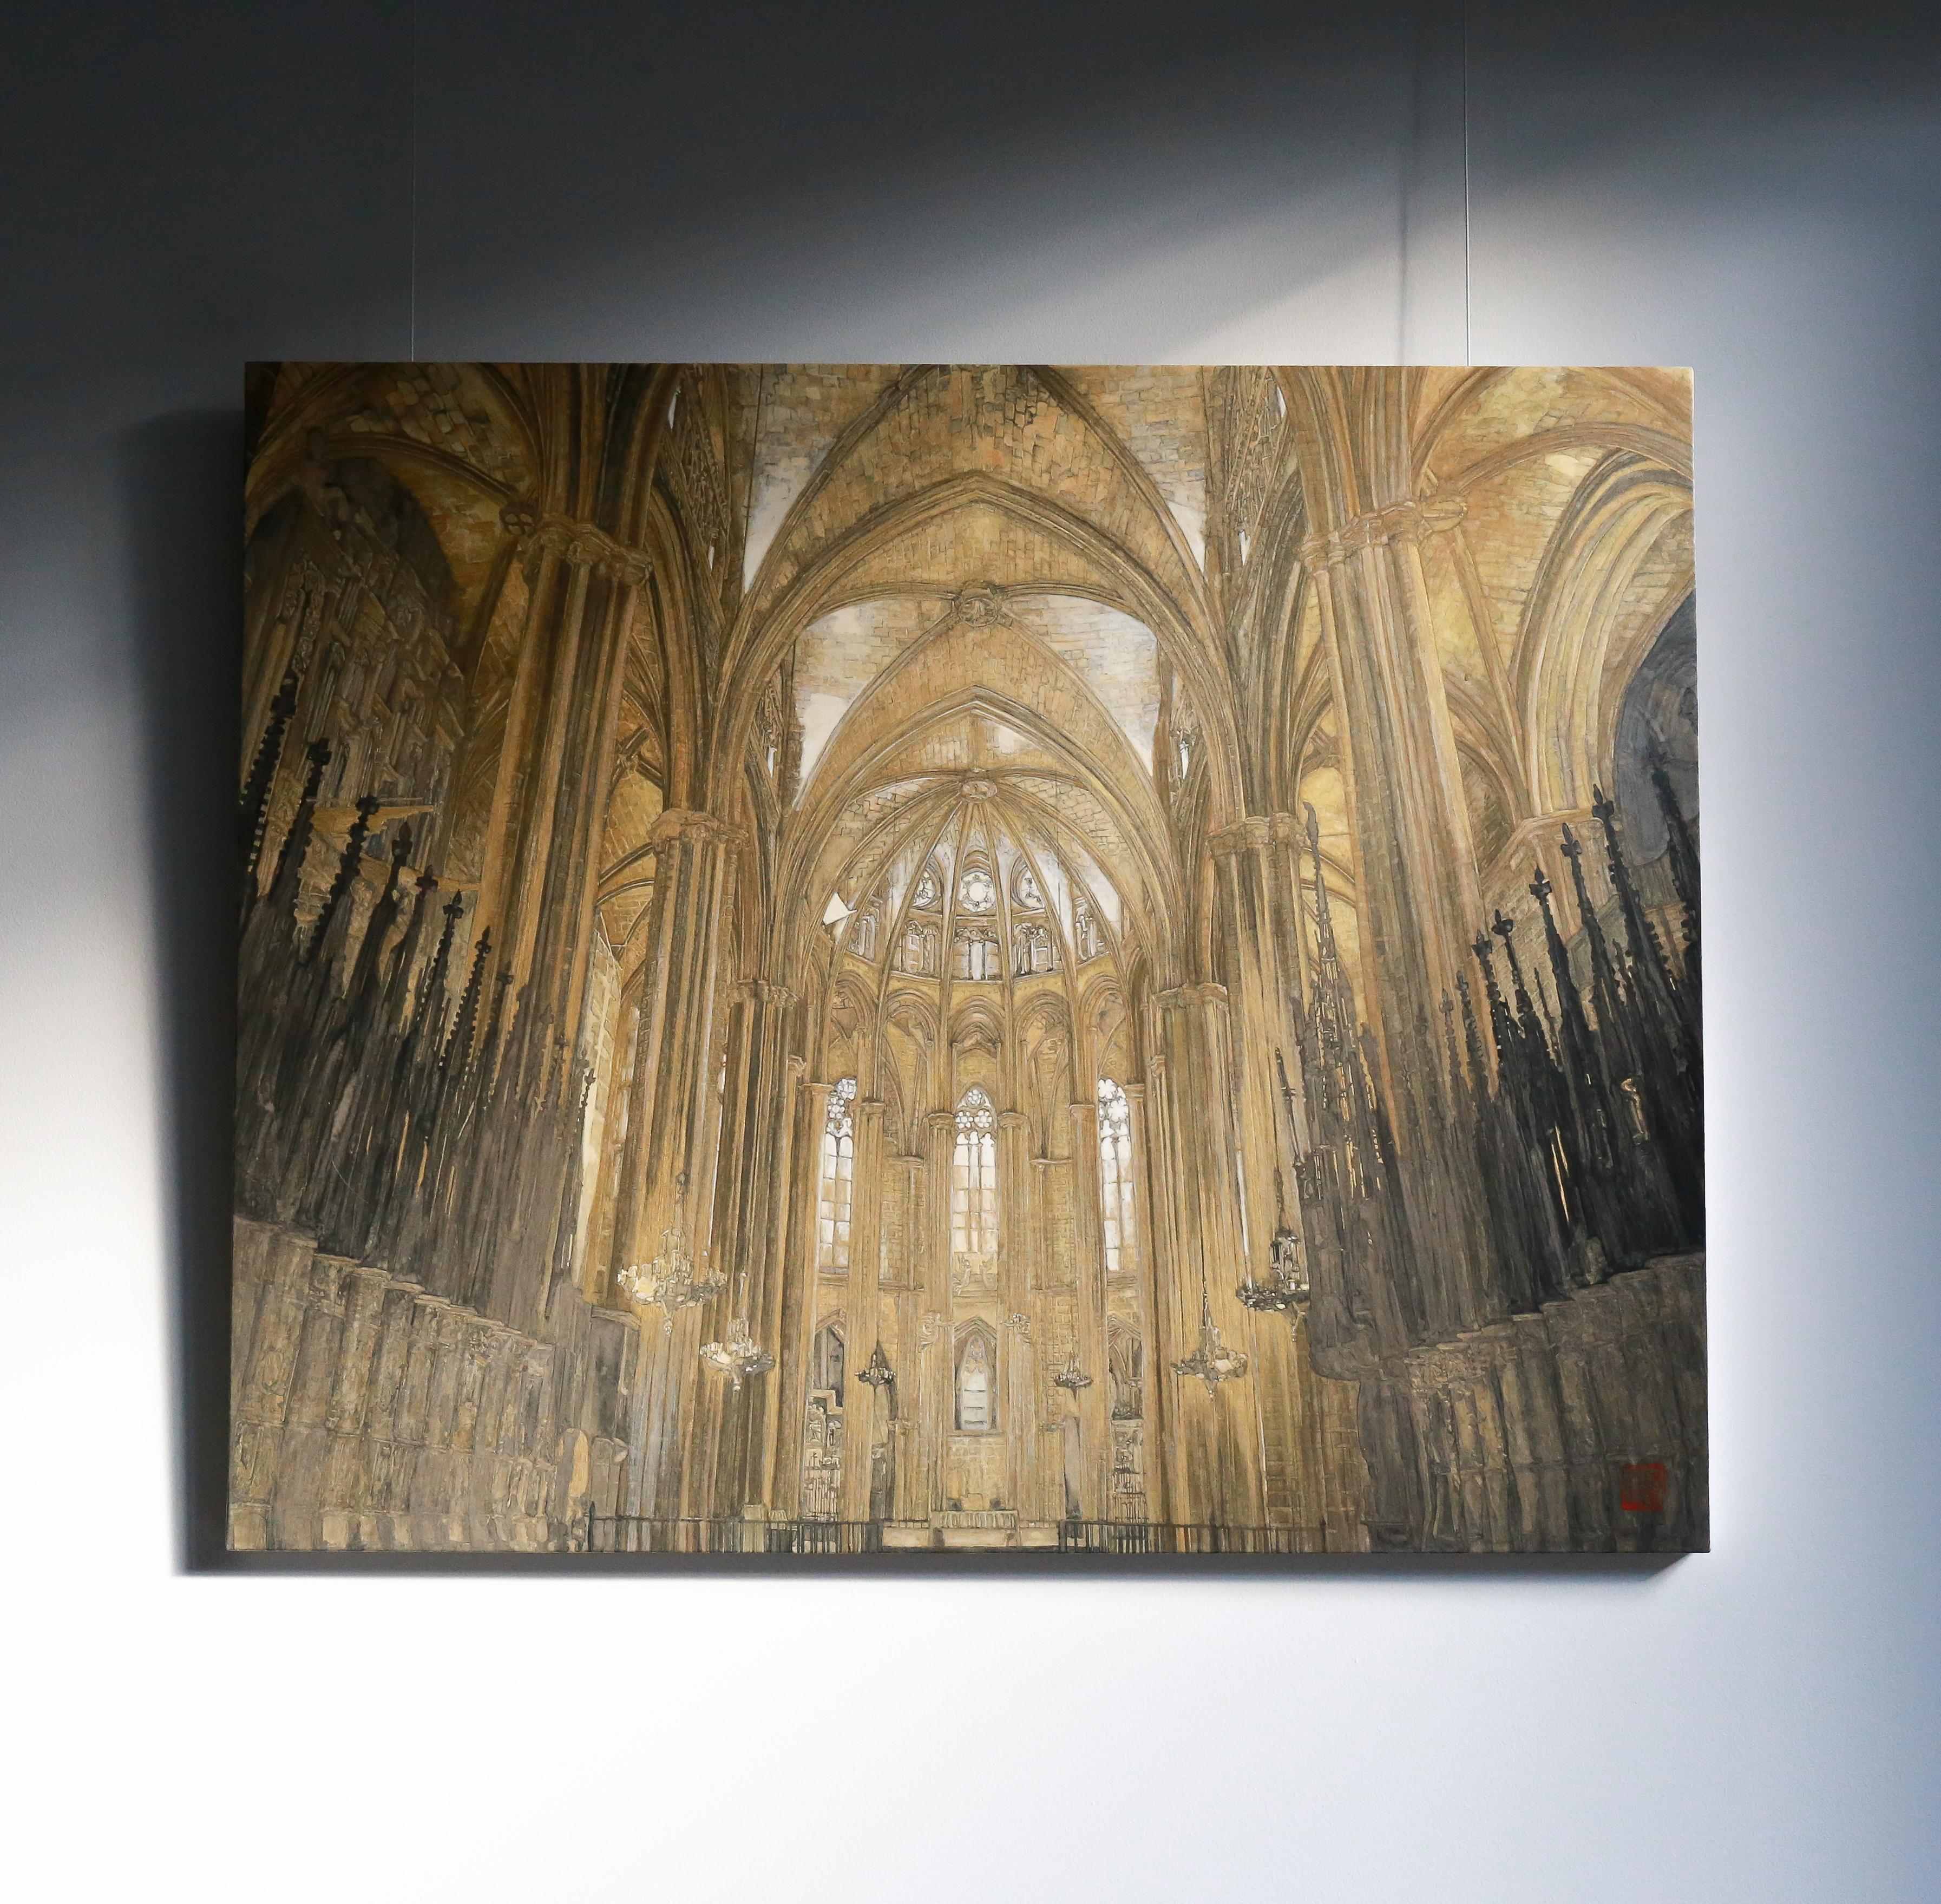 Barcelona Cathedral - 24k Gold and Minerals, Architecture, Gothic, Realism - Painting by Maria Mitsumori